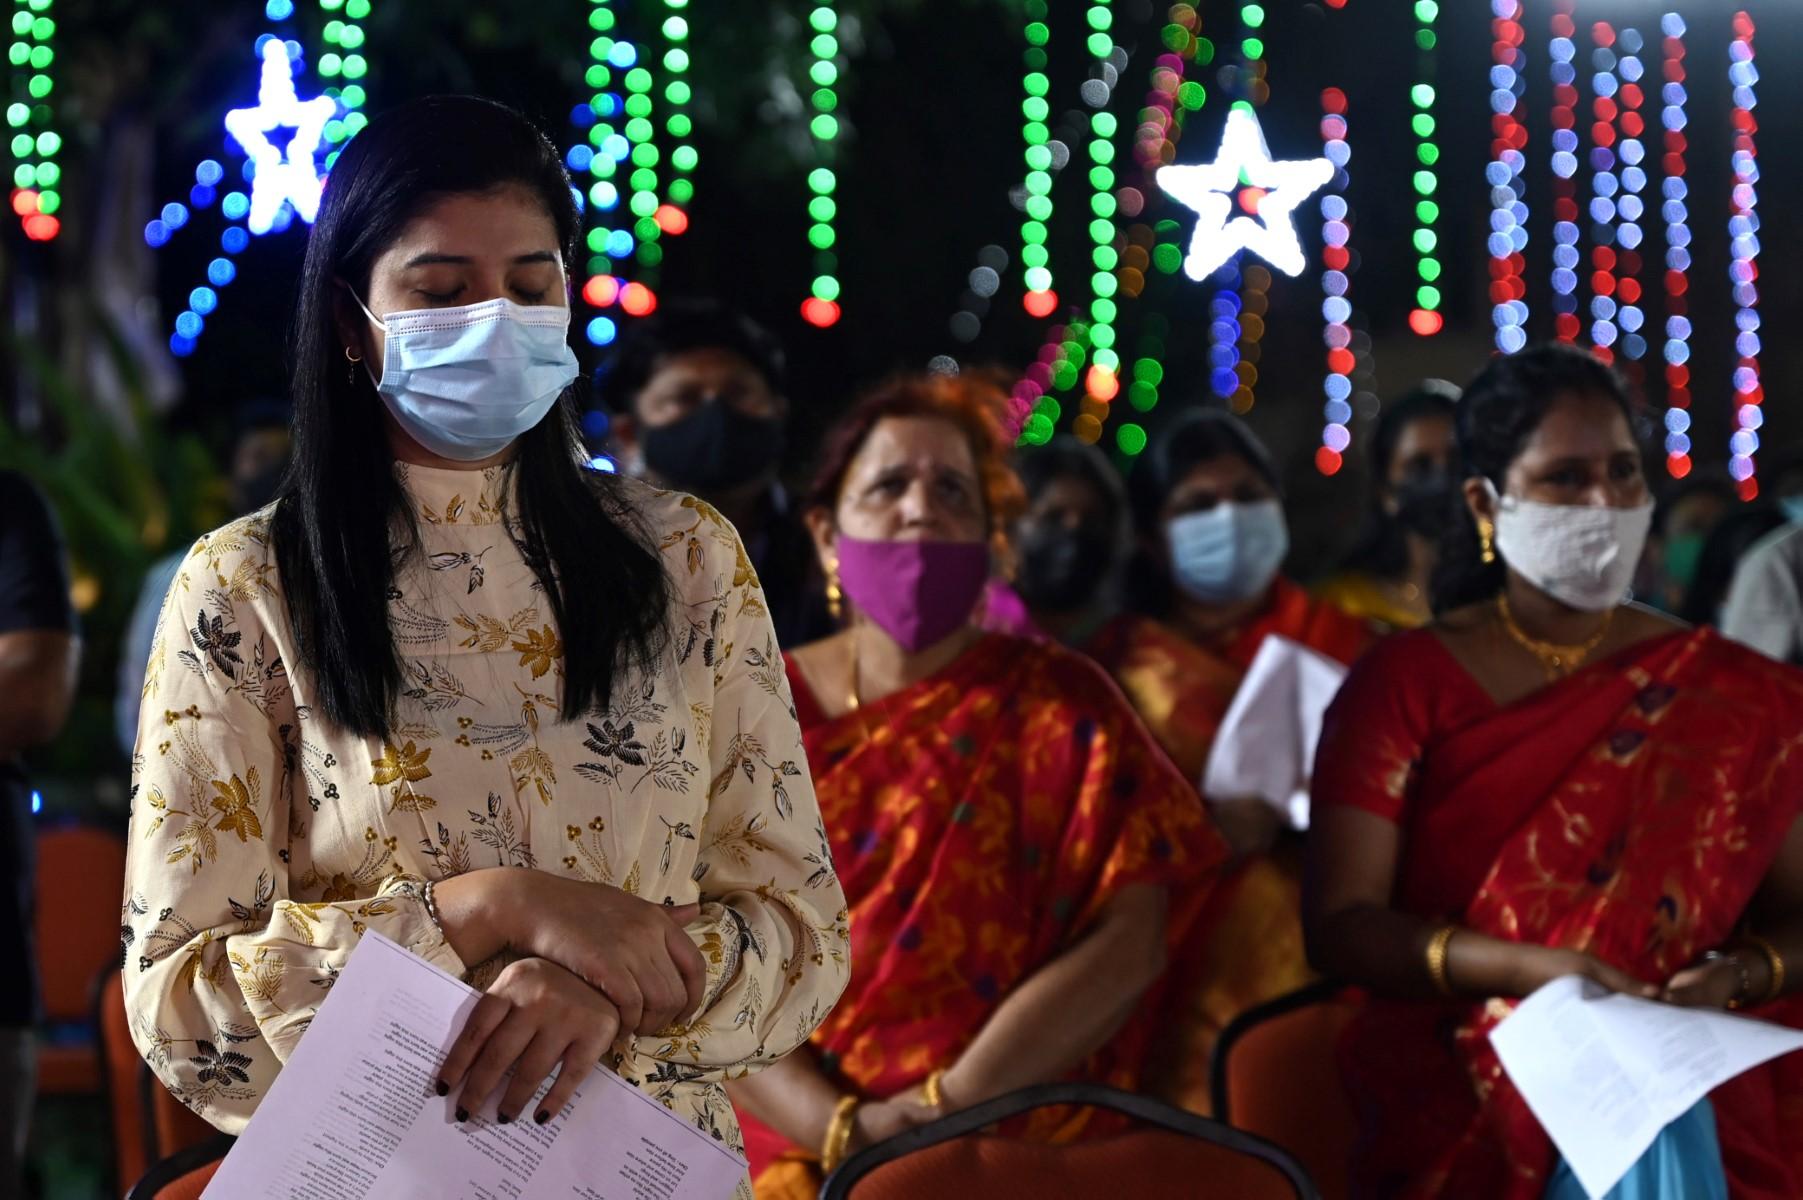 Christian devotees pray at Our Lady of Light Church on Christmas Eve in Chennai, on Dec 24. Photo: AFP